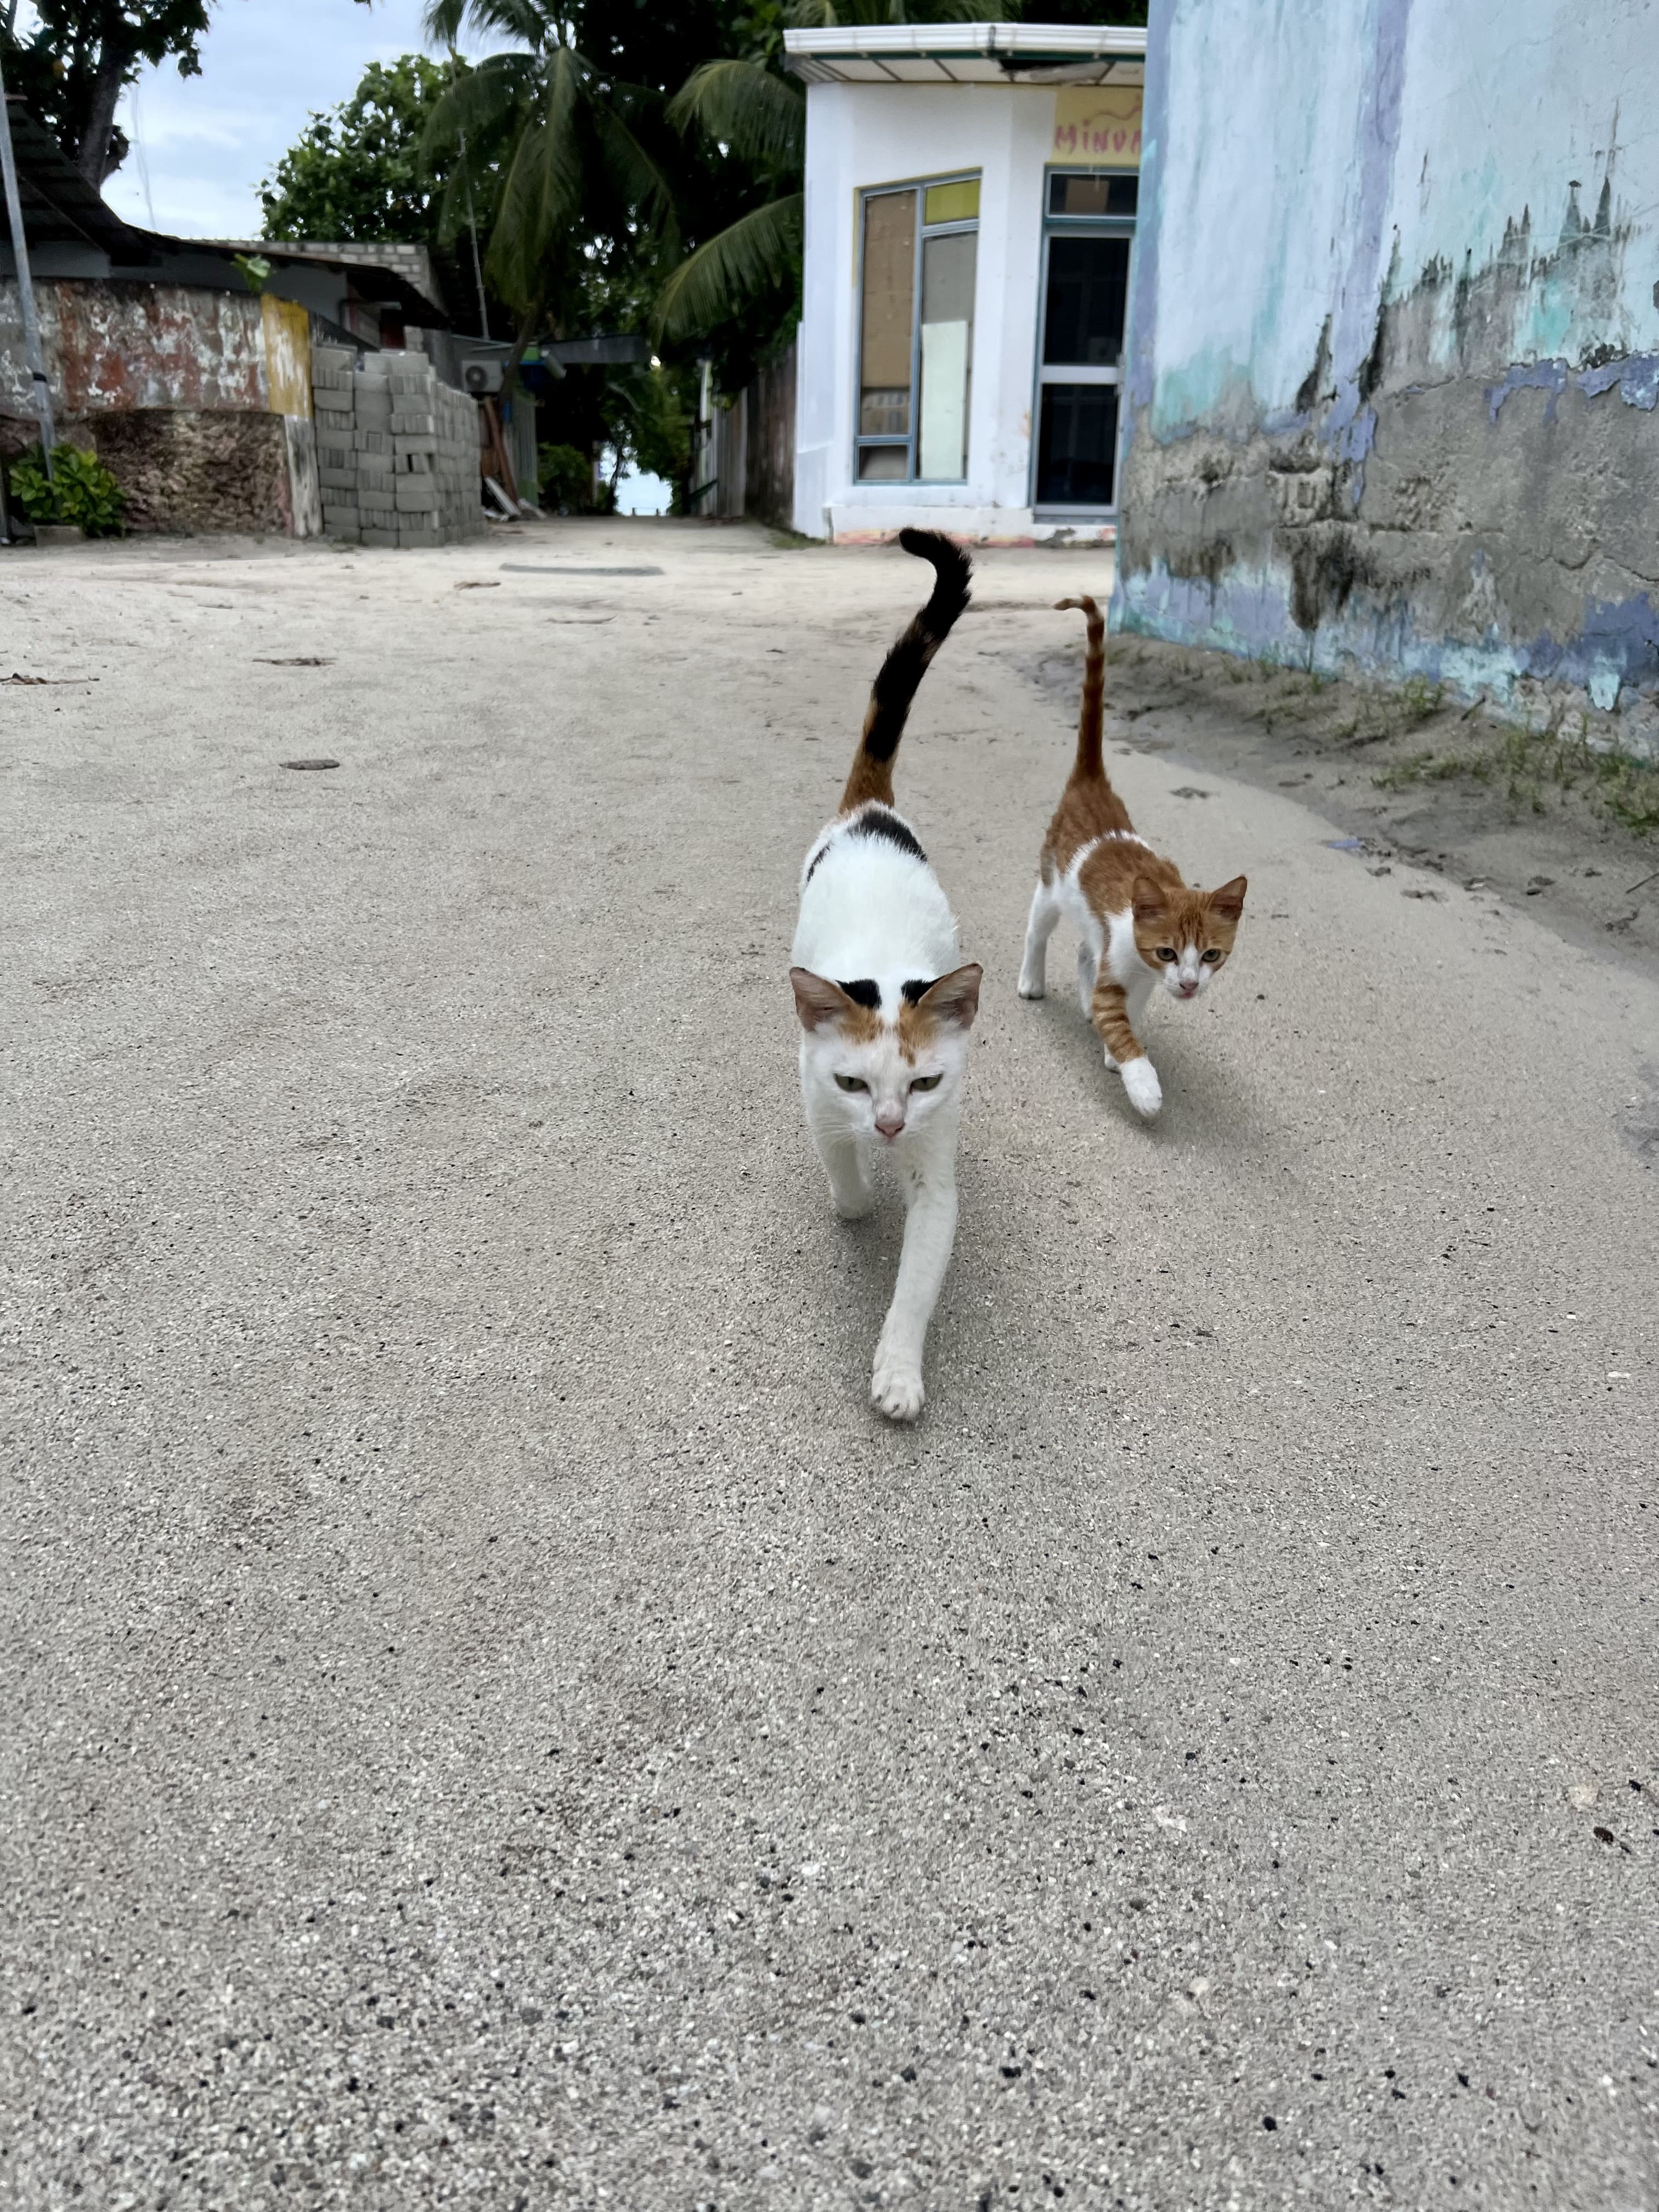 Two kittens walking towards the viewer geeting with their tails up.